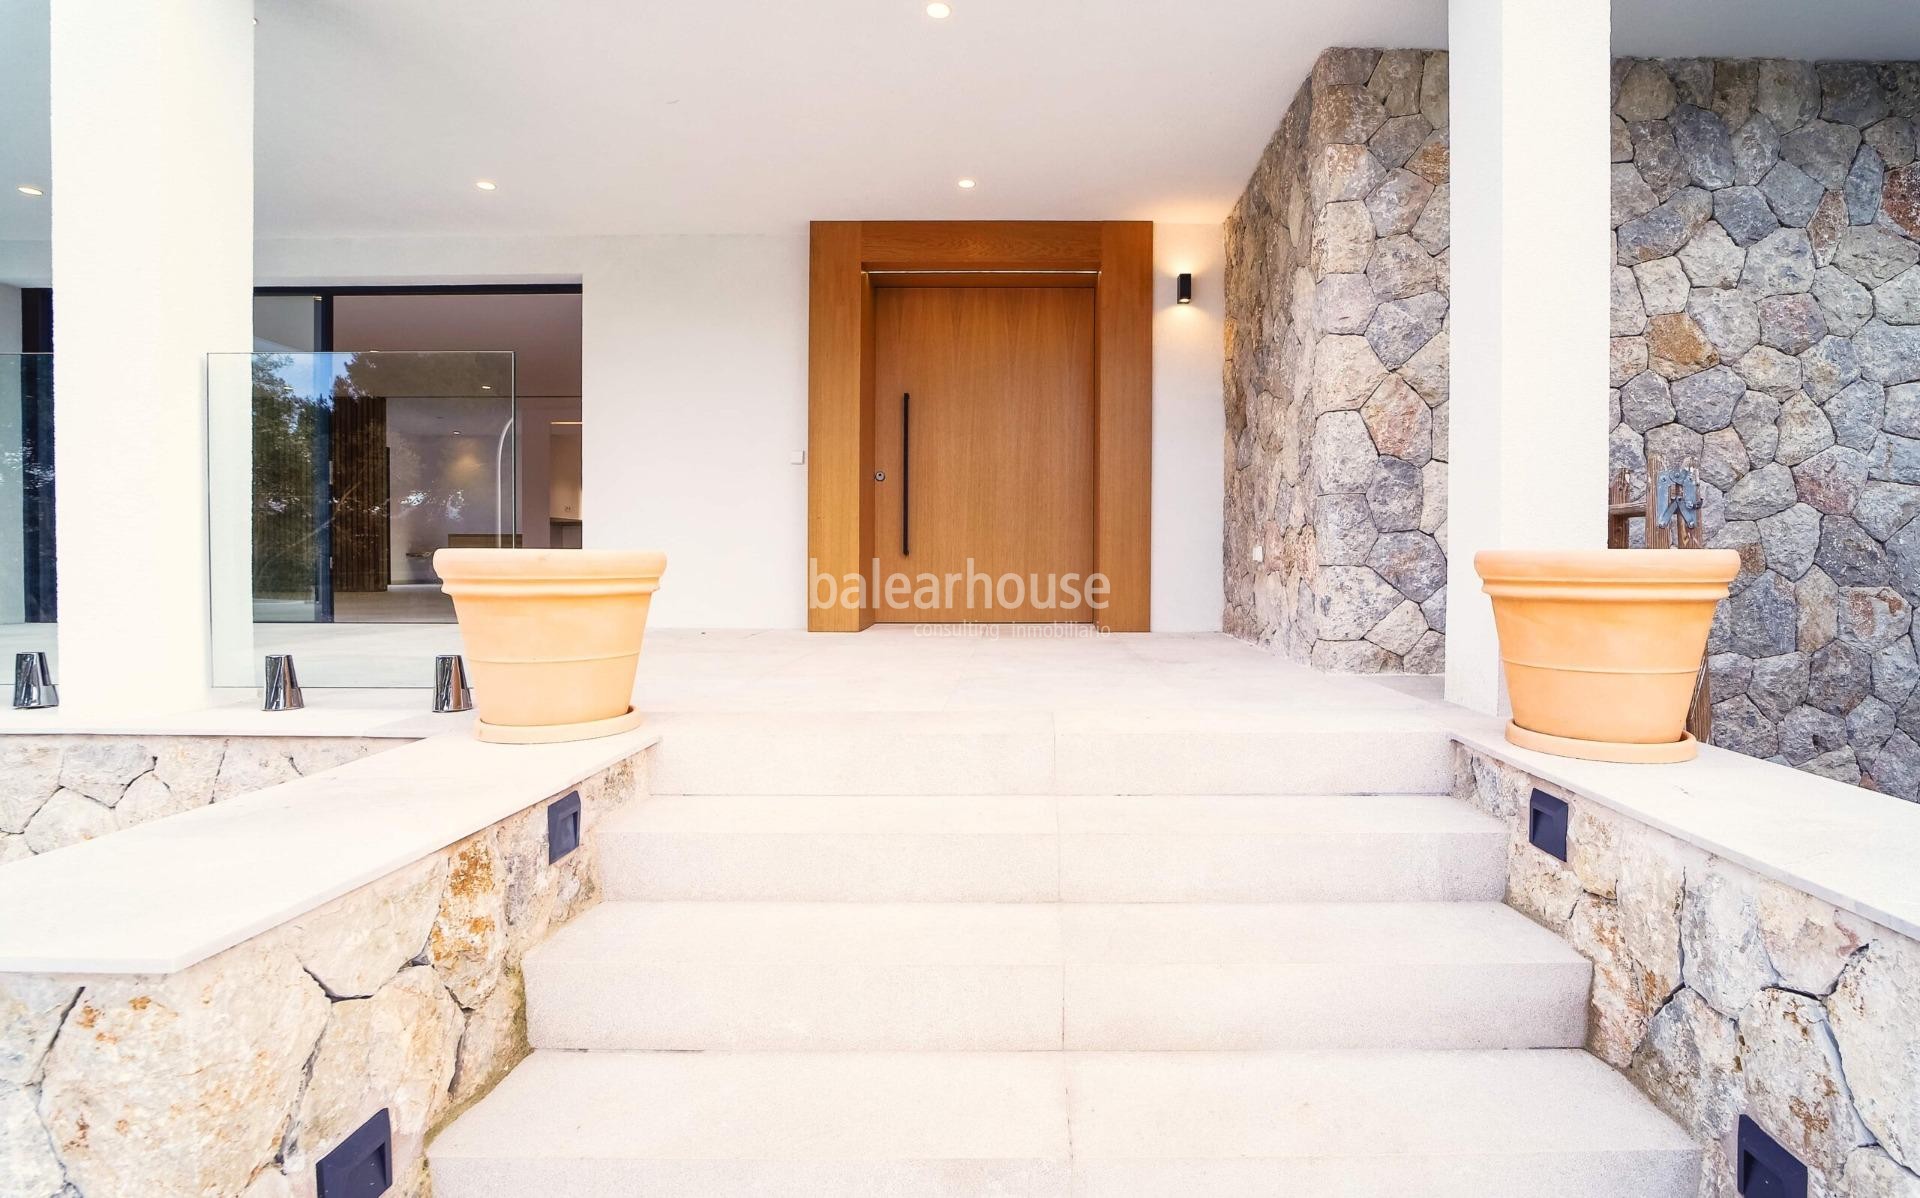 Exceptional brand new contemporary villa in Santa Ponsa with garden, pool and close to beaches